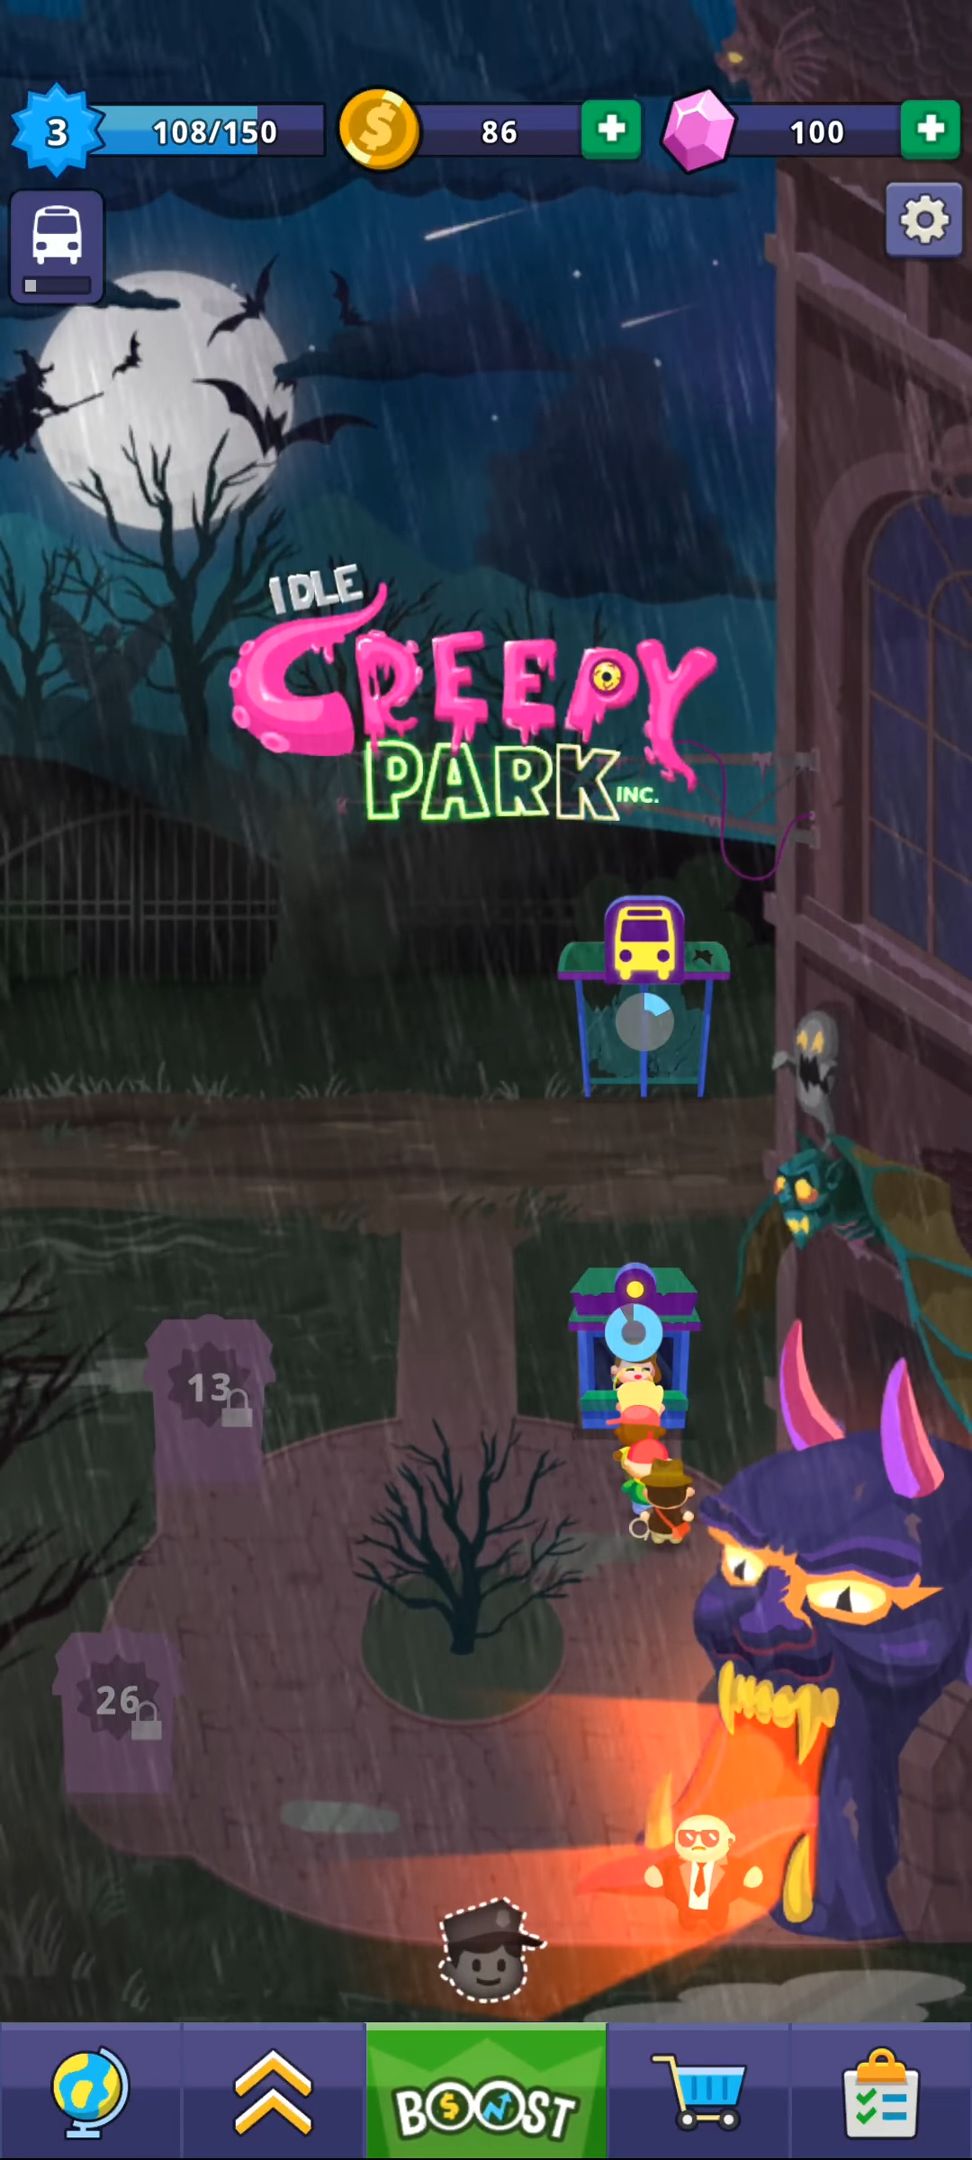 Download Idle Creepy Park Inc. Android free game.